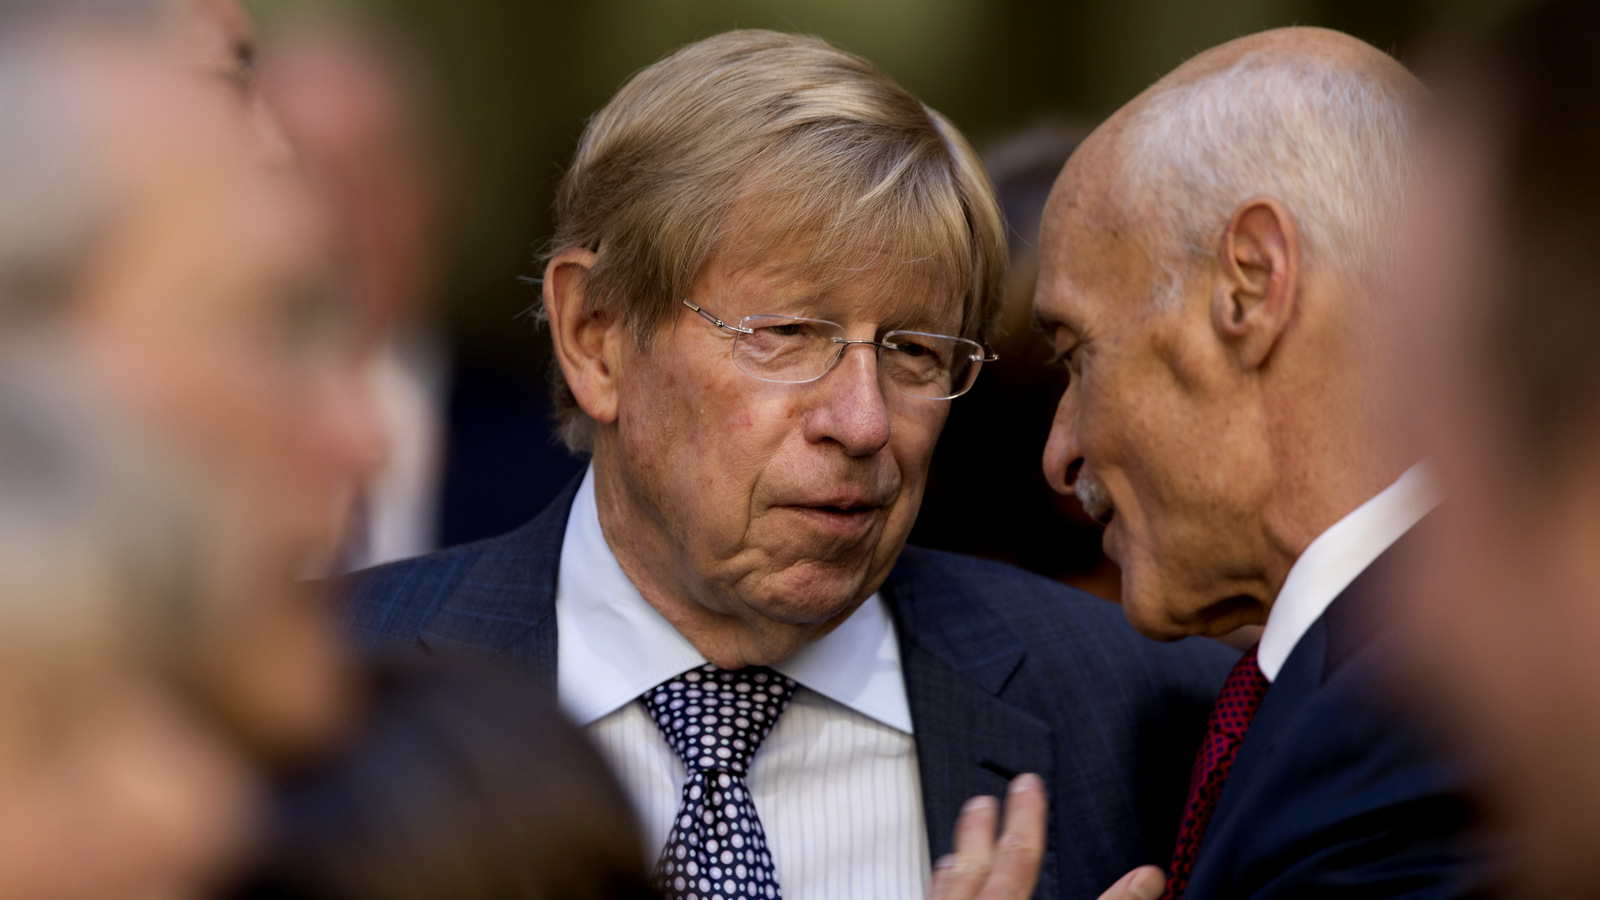 Former United States Solicitor General Ted Olson, center, speaks with former Homeland Security Secretary Michael Chertoff, right, before an installation ceremony for FBI Director Chris Wray at the FBI Building, Sept. 28, 2017, in Washington. (AP/Andrew Harnik)